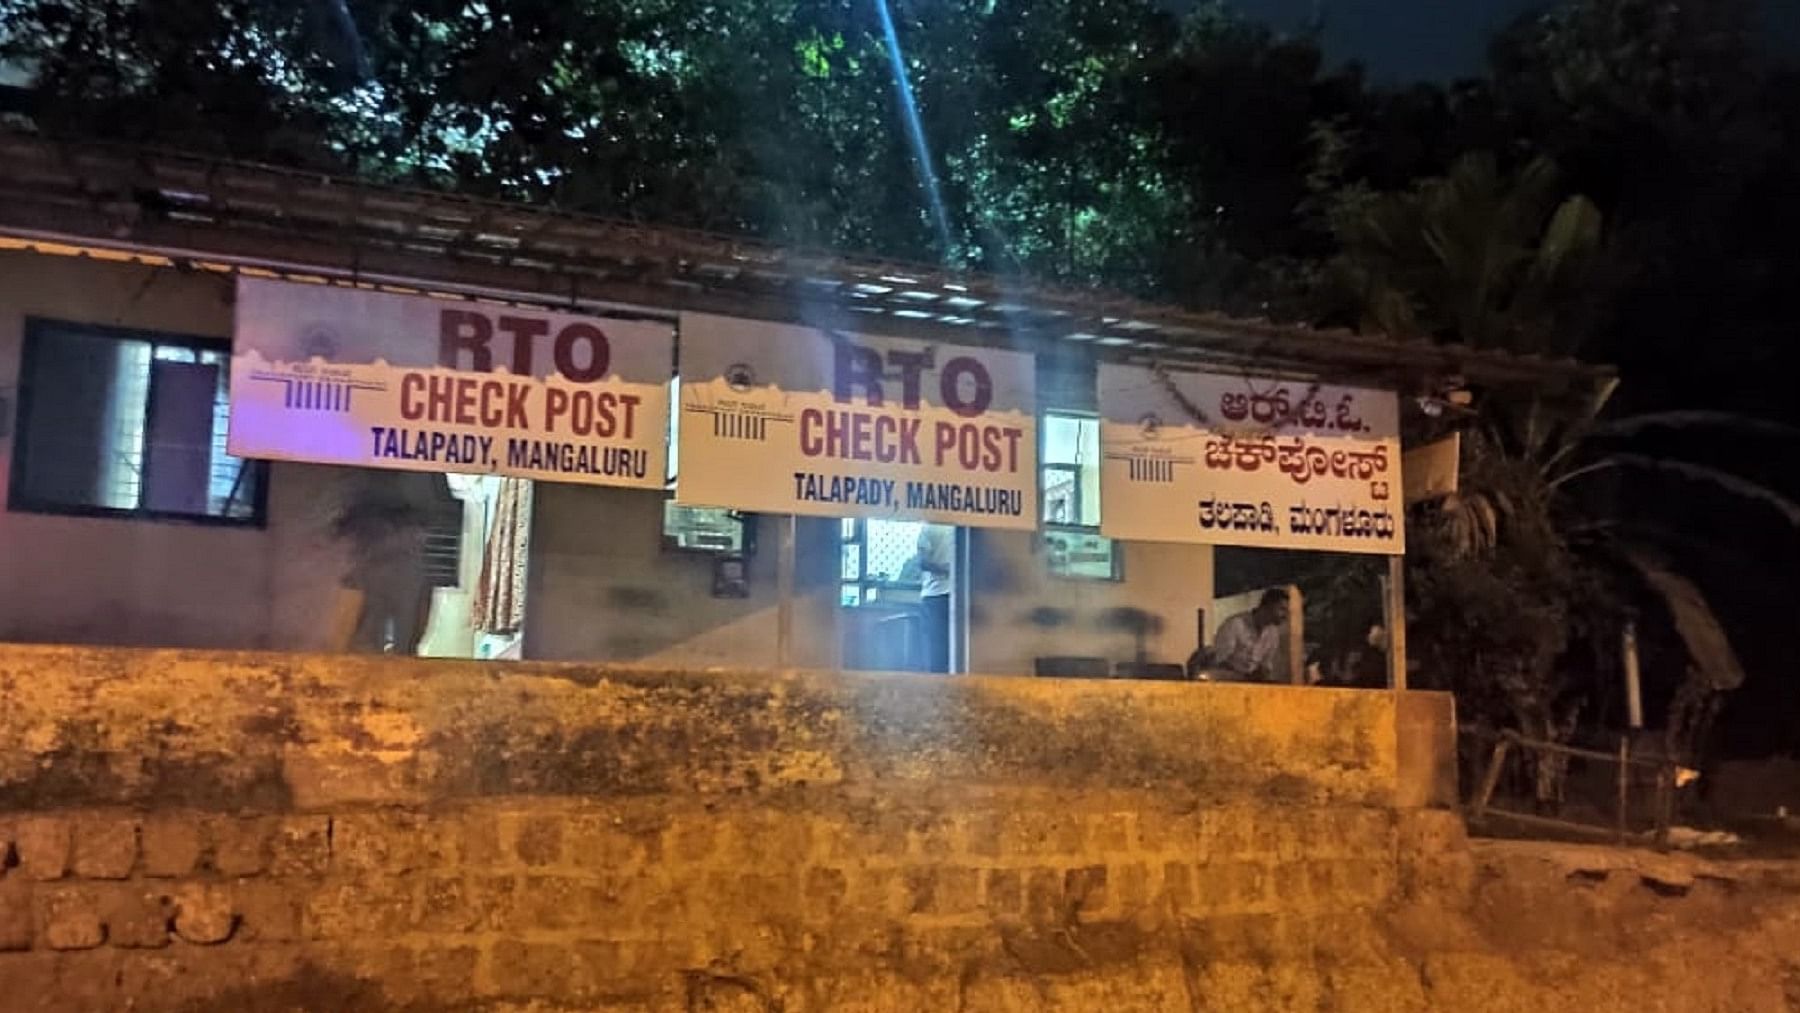 A view of the RTO check post at Talapady. Credit: Special arrangement